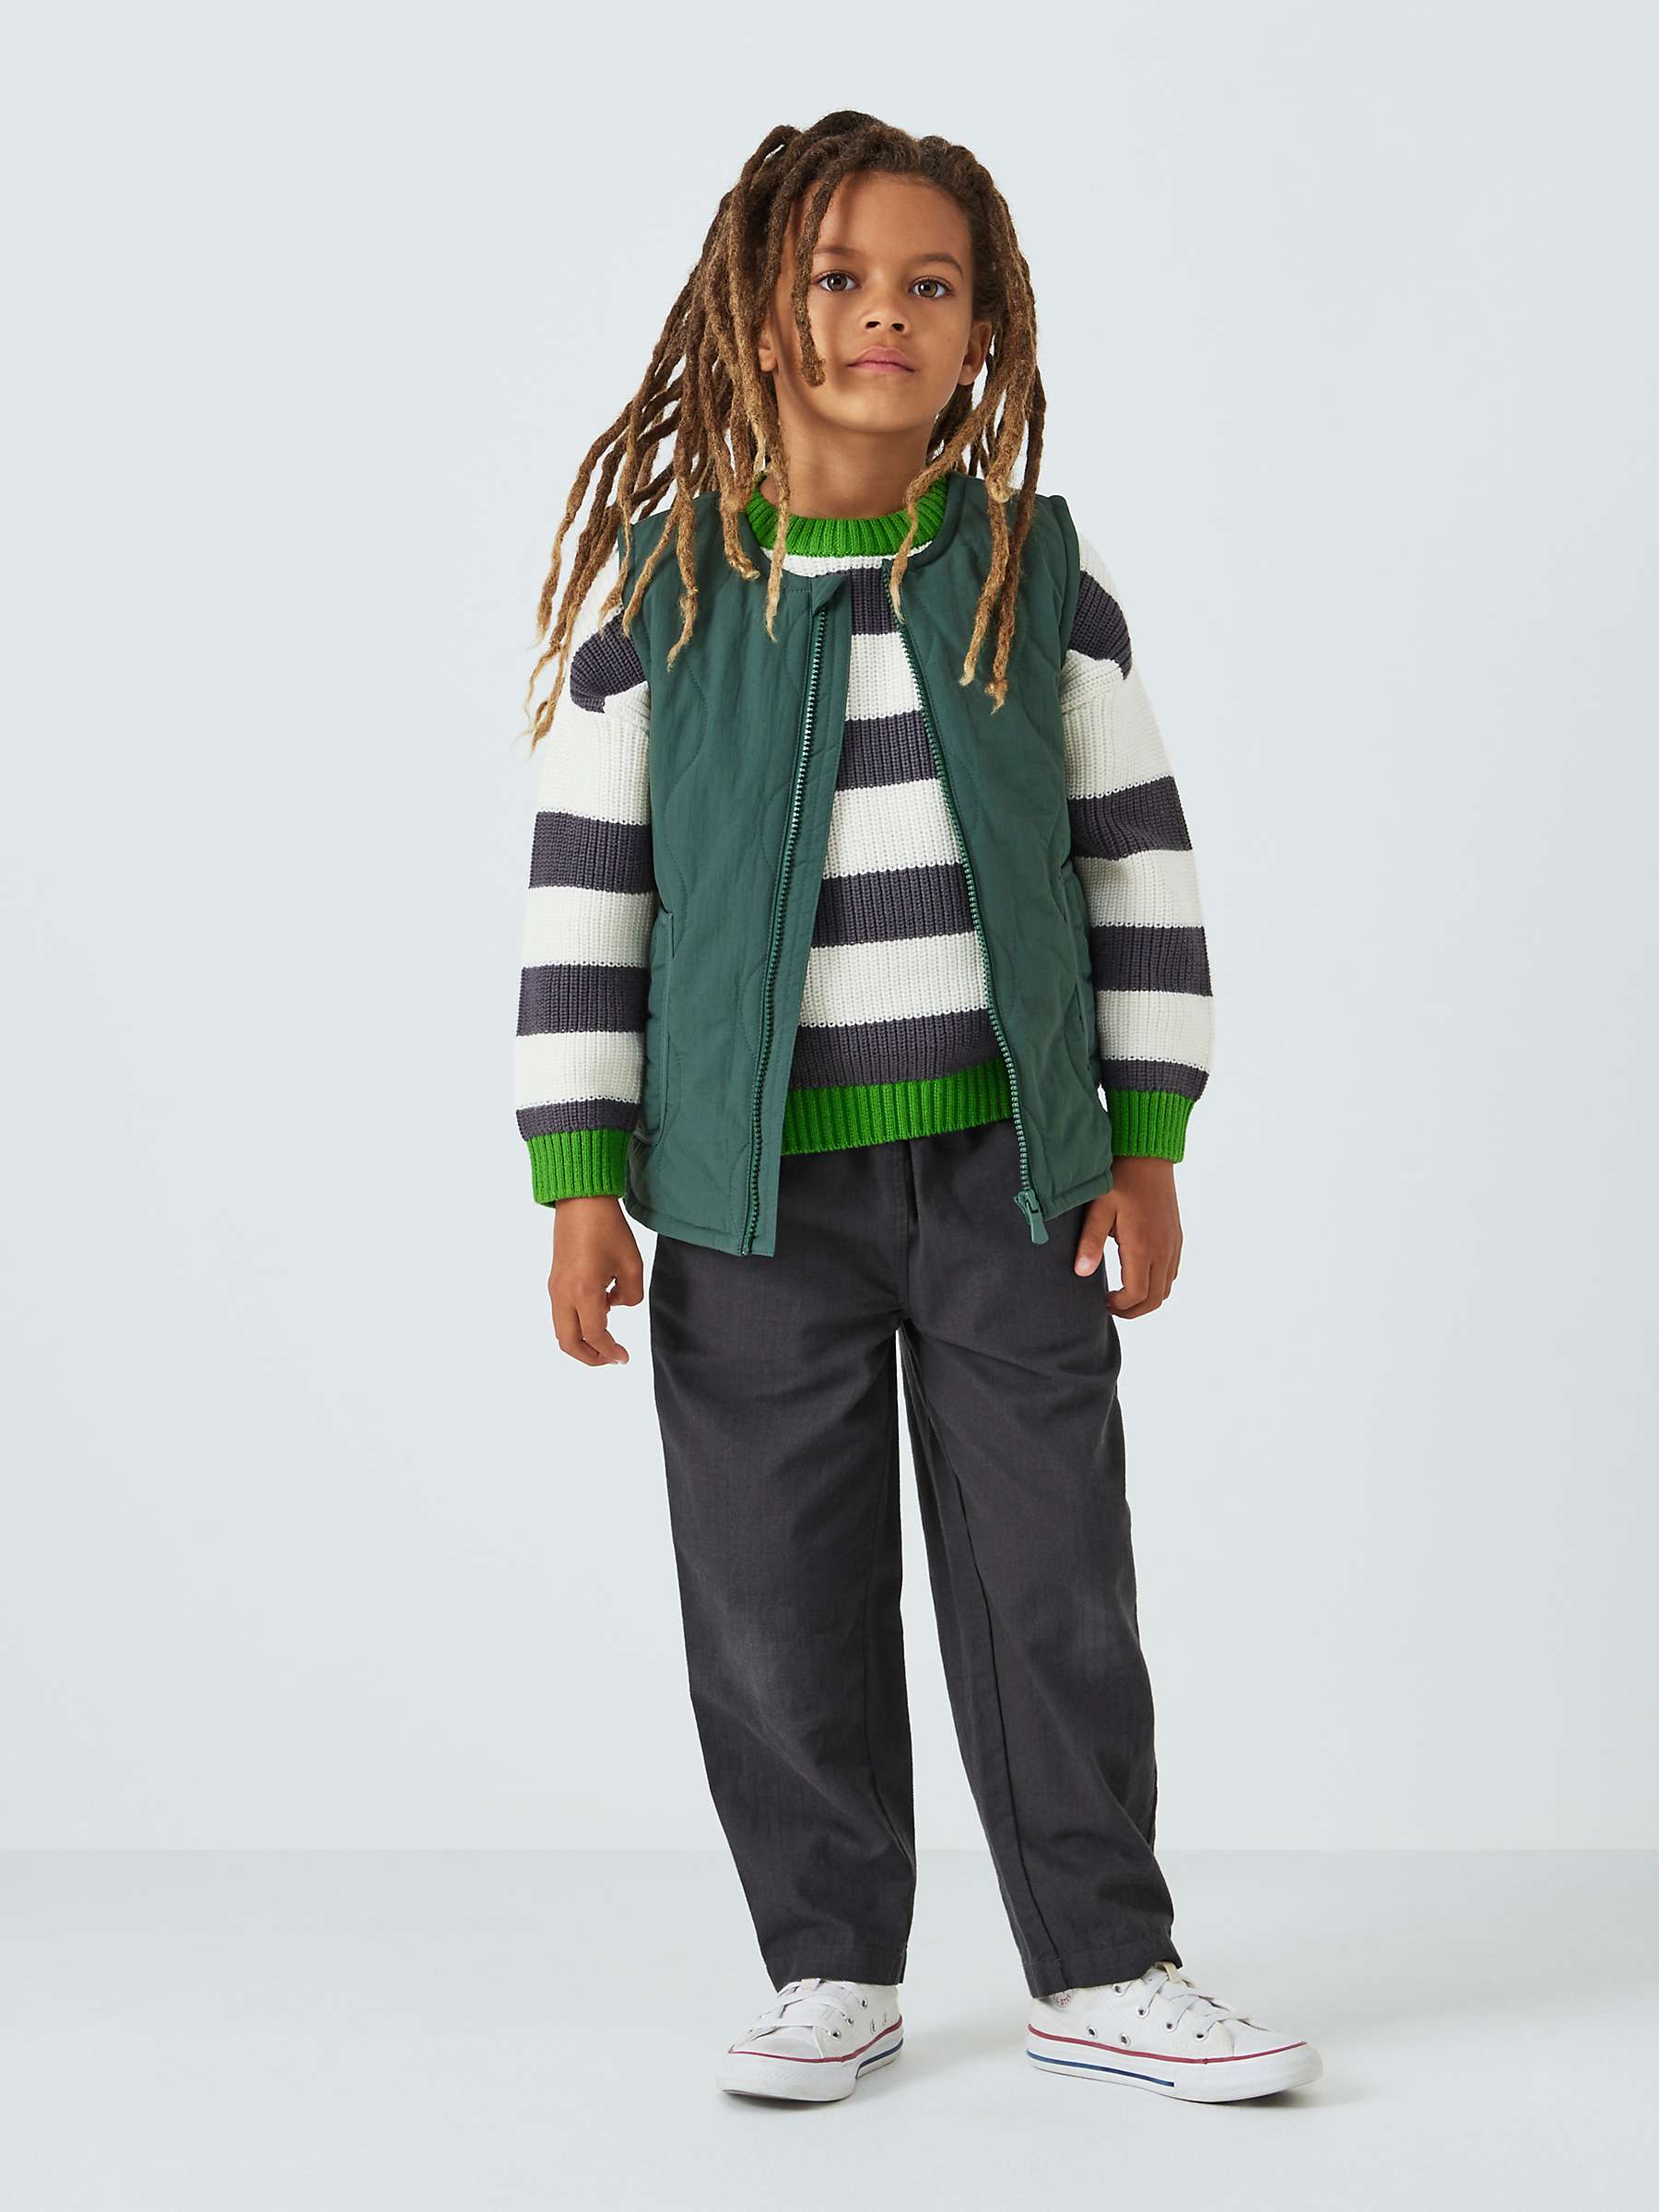 Buy John Lewis ANYDAY Kids' Plain Ripstop Trousers Online at johnlewis.com